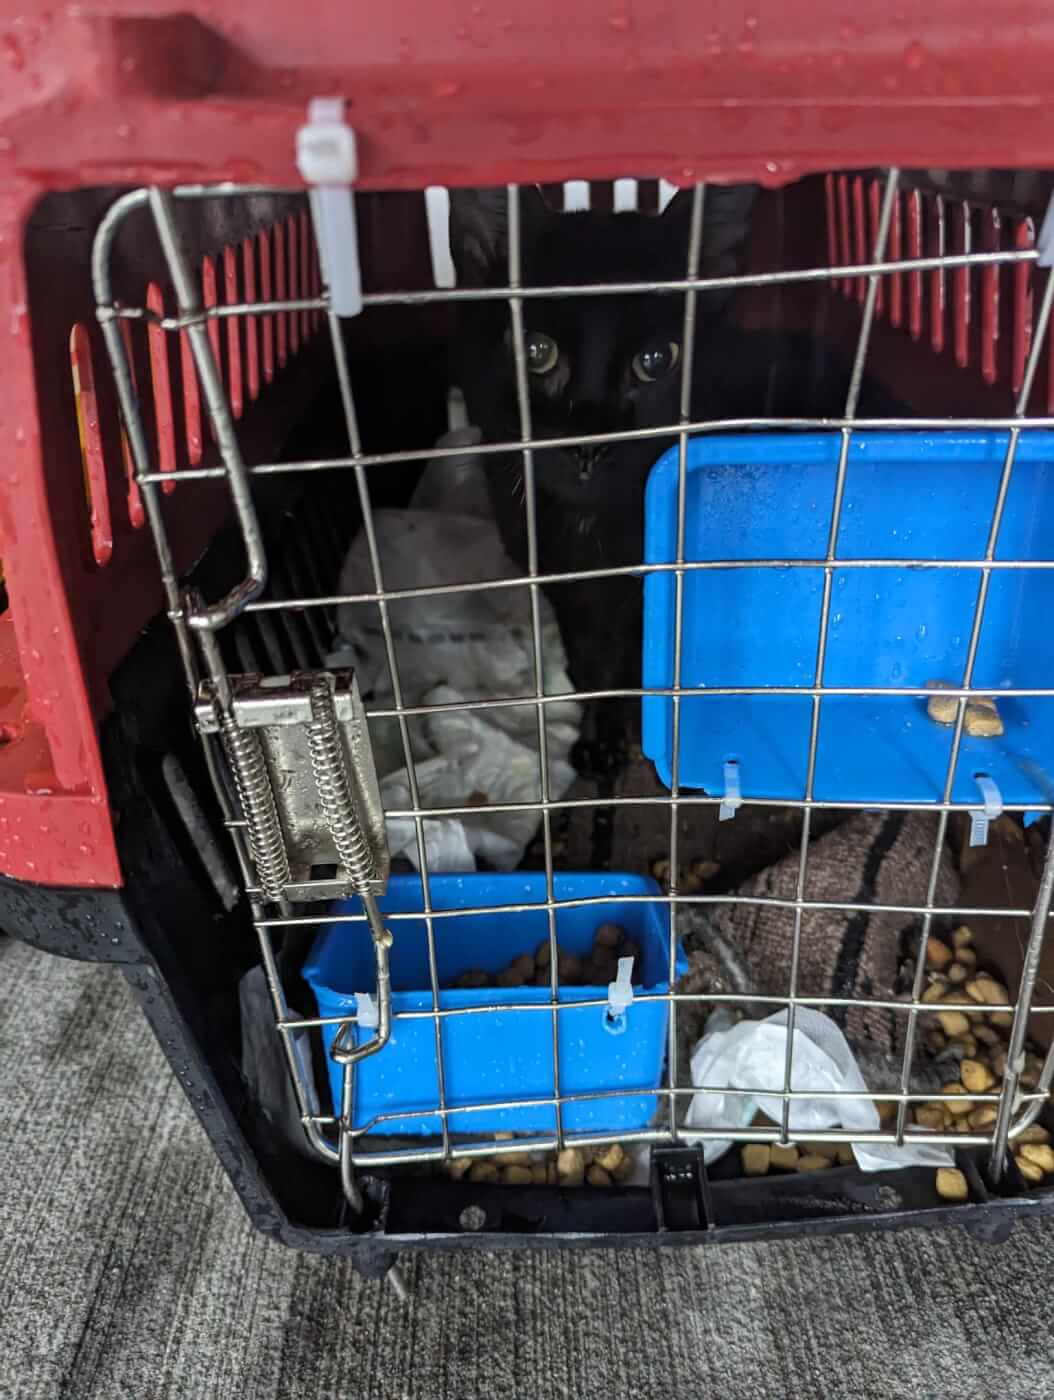 A wet red crate with a black cat inside